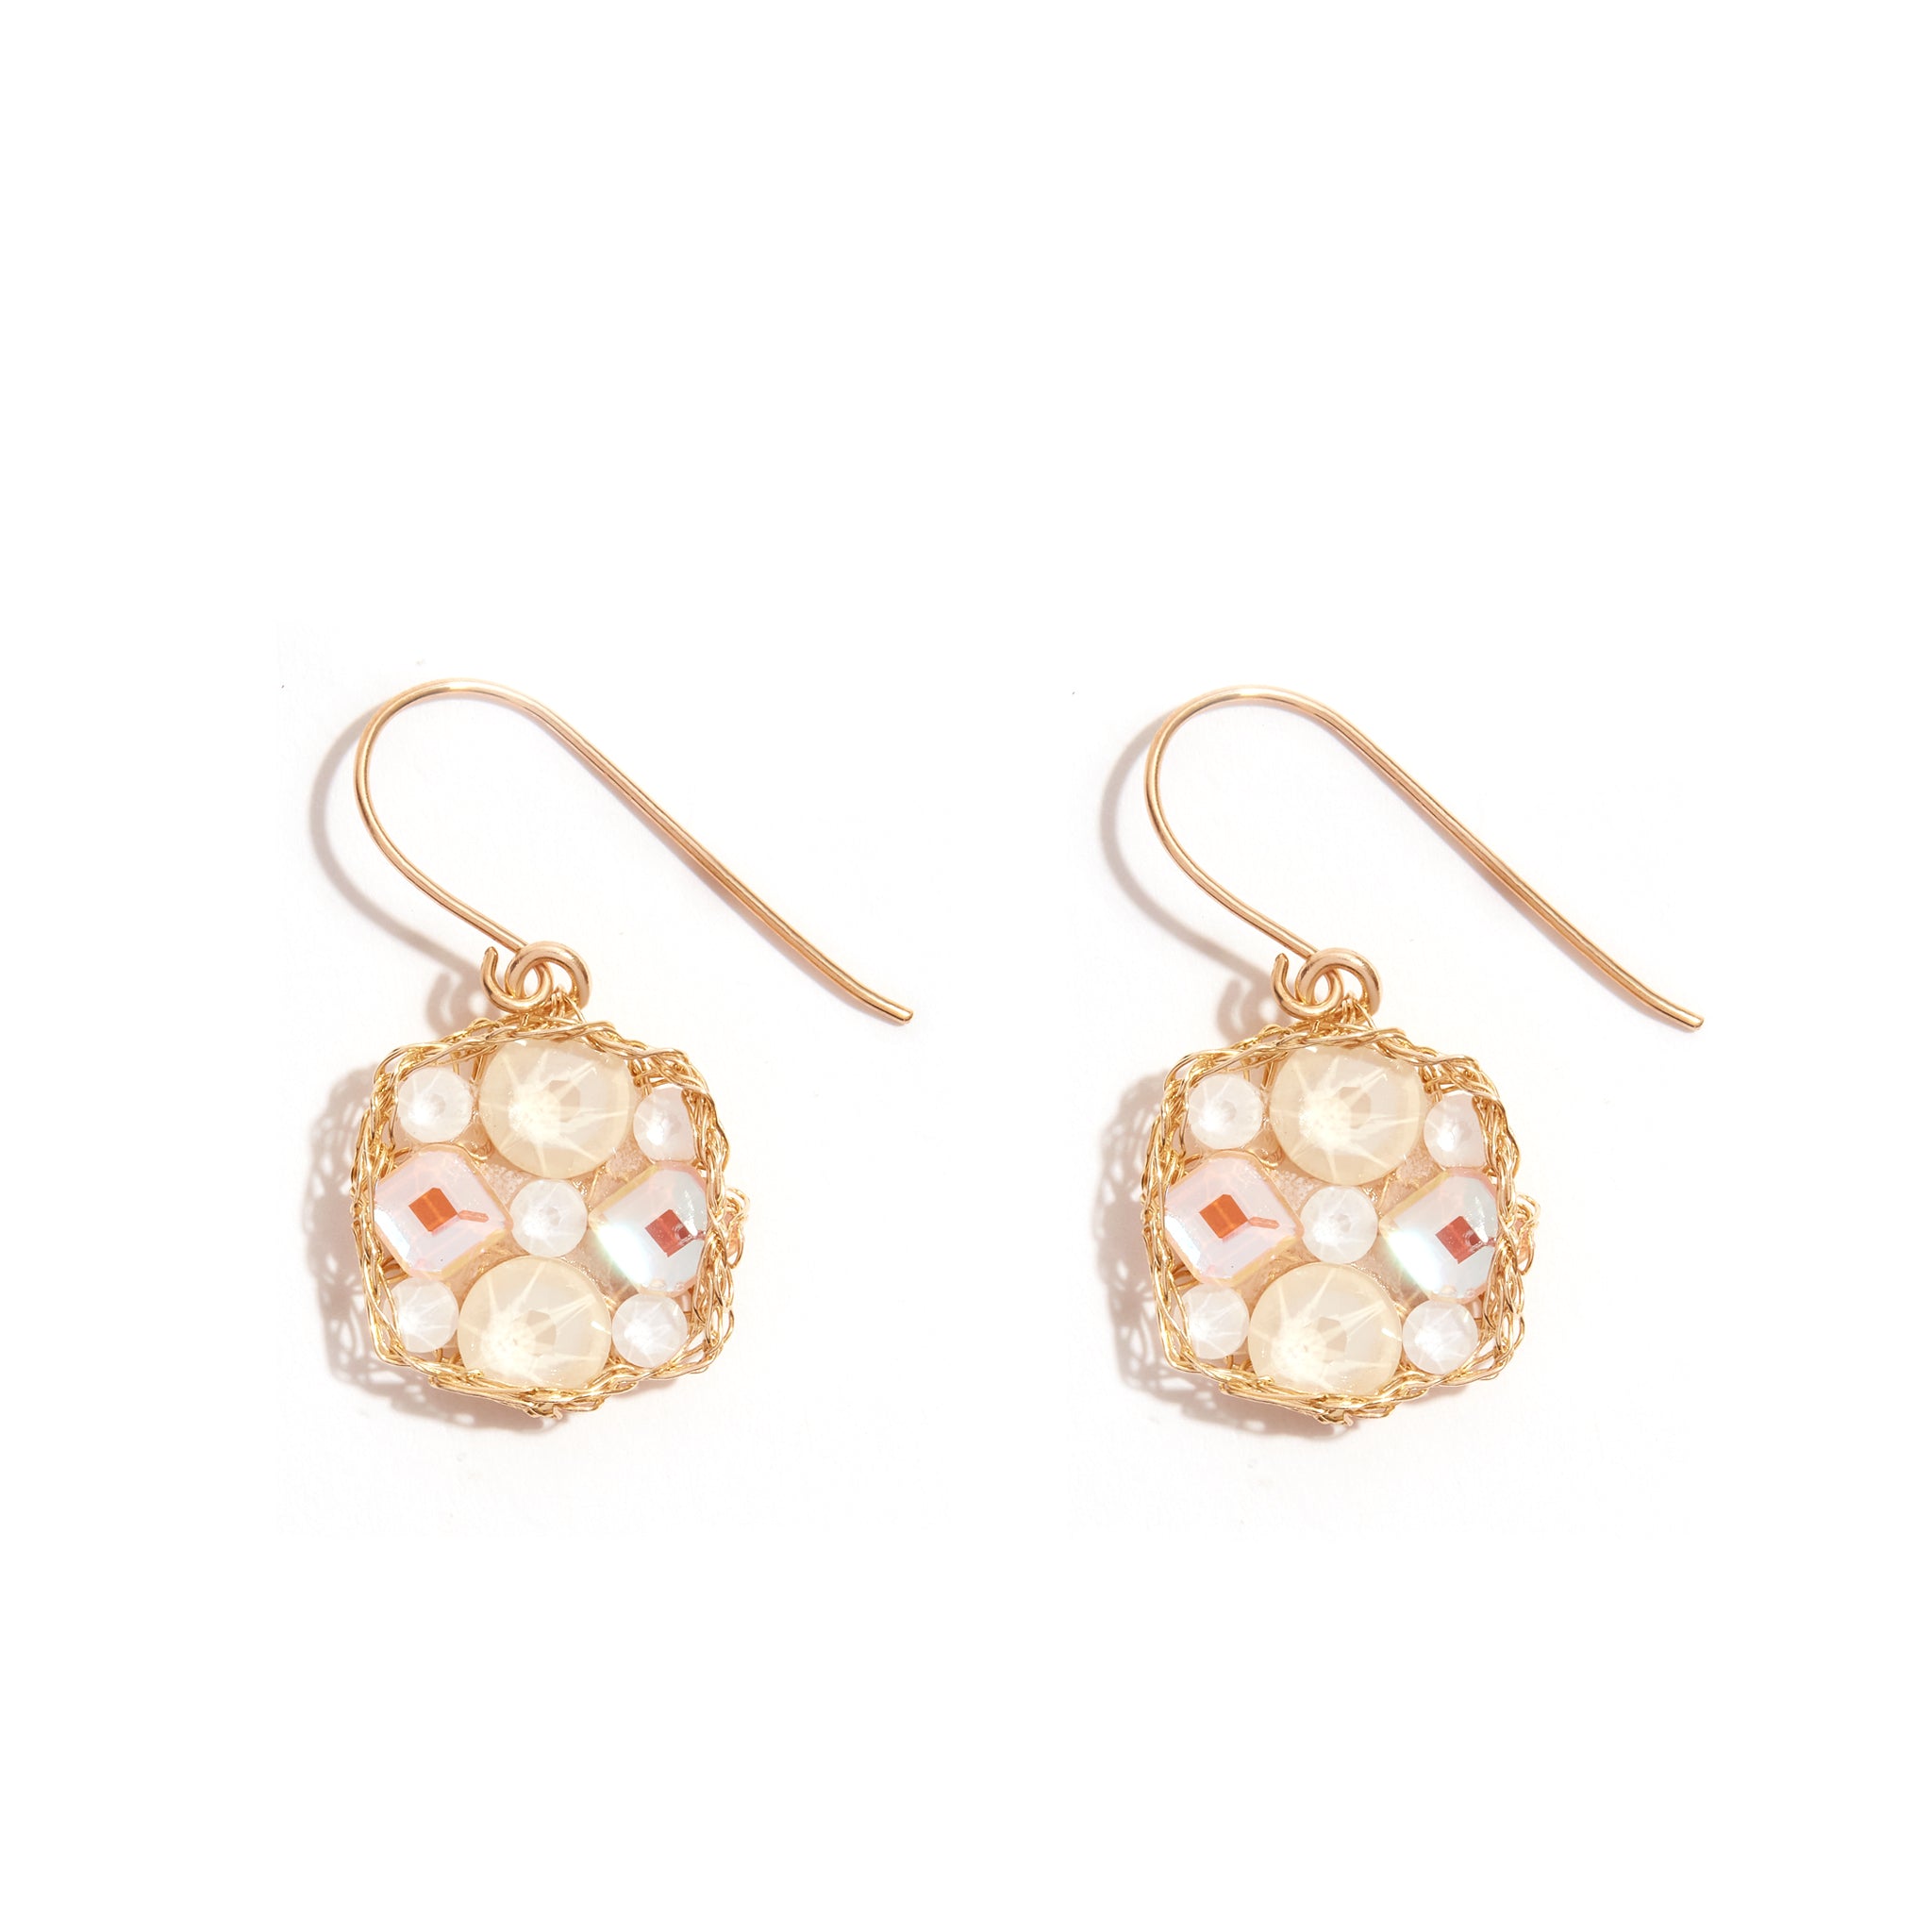 Beautiful earrings made with sparkling Swarovski crystals including Iganyite and Ivory Cream Cream, woven together with Wyatt Eaganite crystals. Material: Goldfield Square 14m. Design: Flower-shaped arrangement.